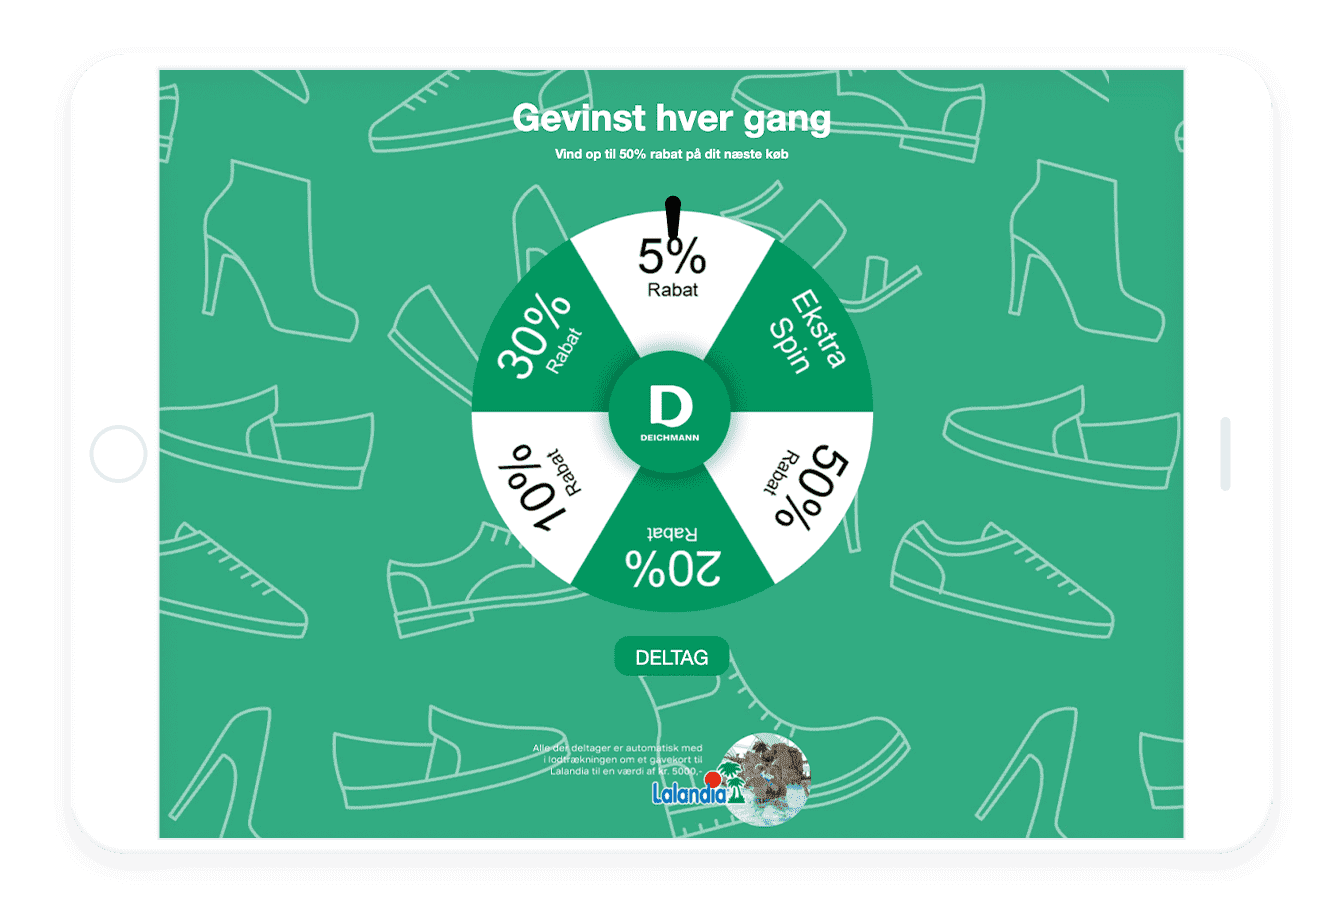 green and white spin a wheel feature. green background with simplified shoes. The wheel prizes are 5-50% off